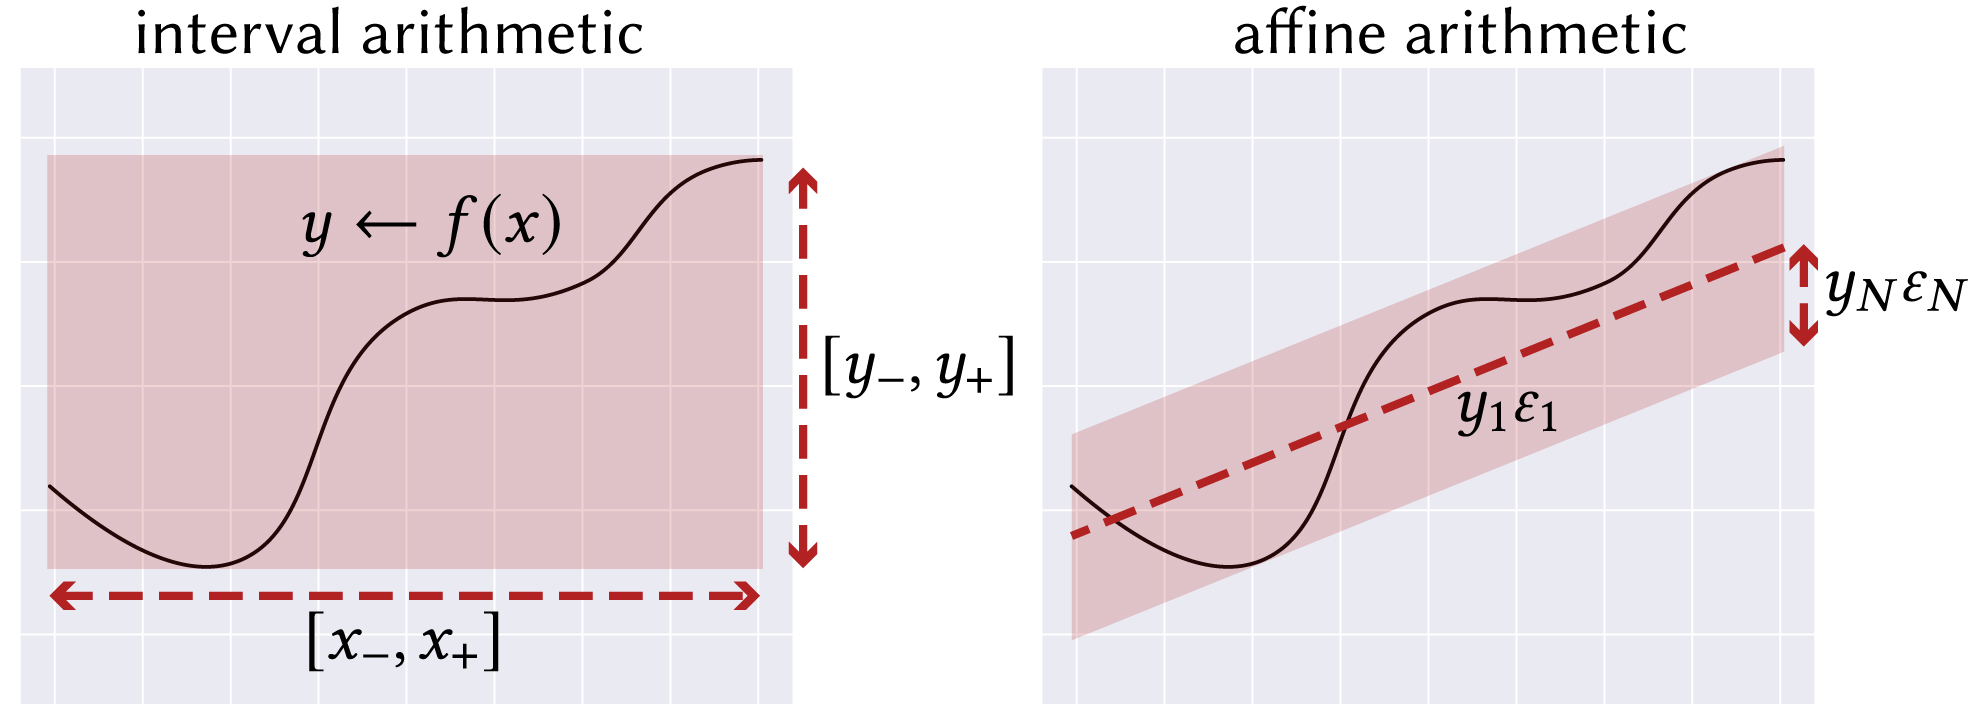 Queries are performed by applying affine arithmetic, a kind of range analysis, to neural networks. Affine arithmetic models the correlation between quantities to achieve much tighter bounds than simple interval arithmetic.